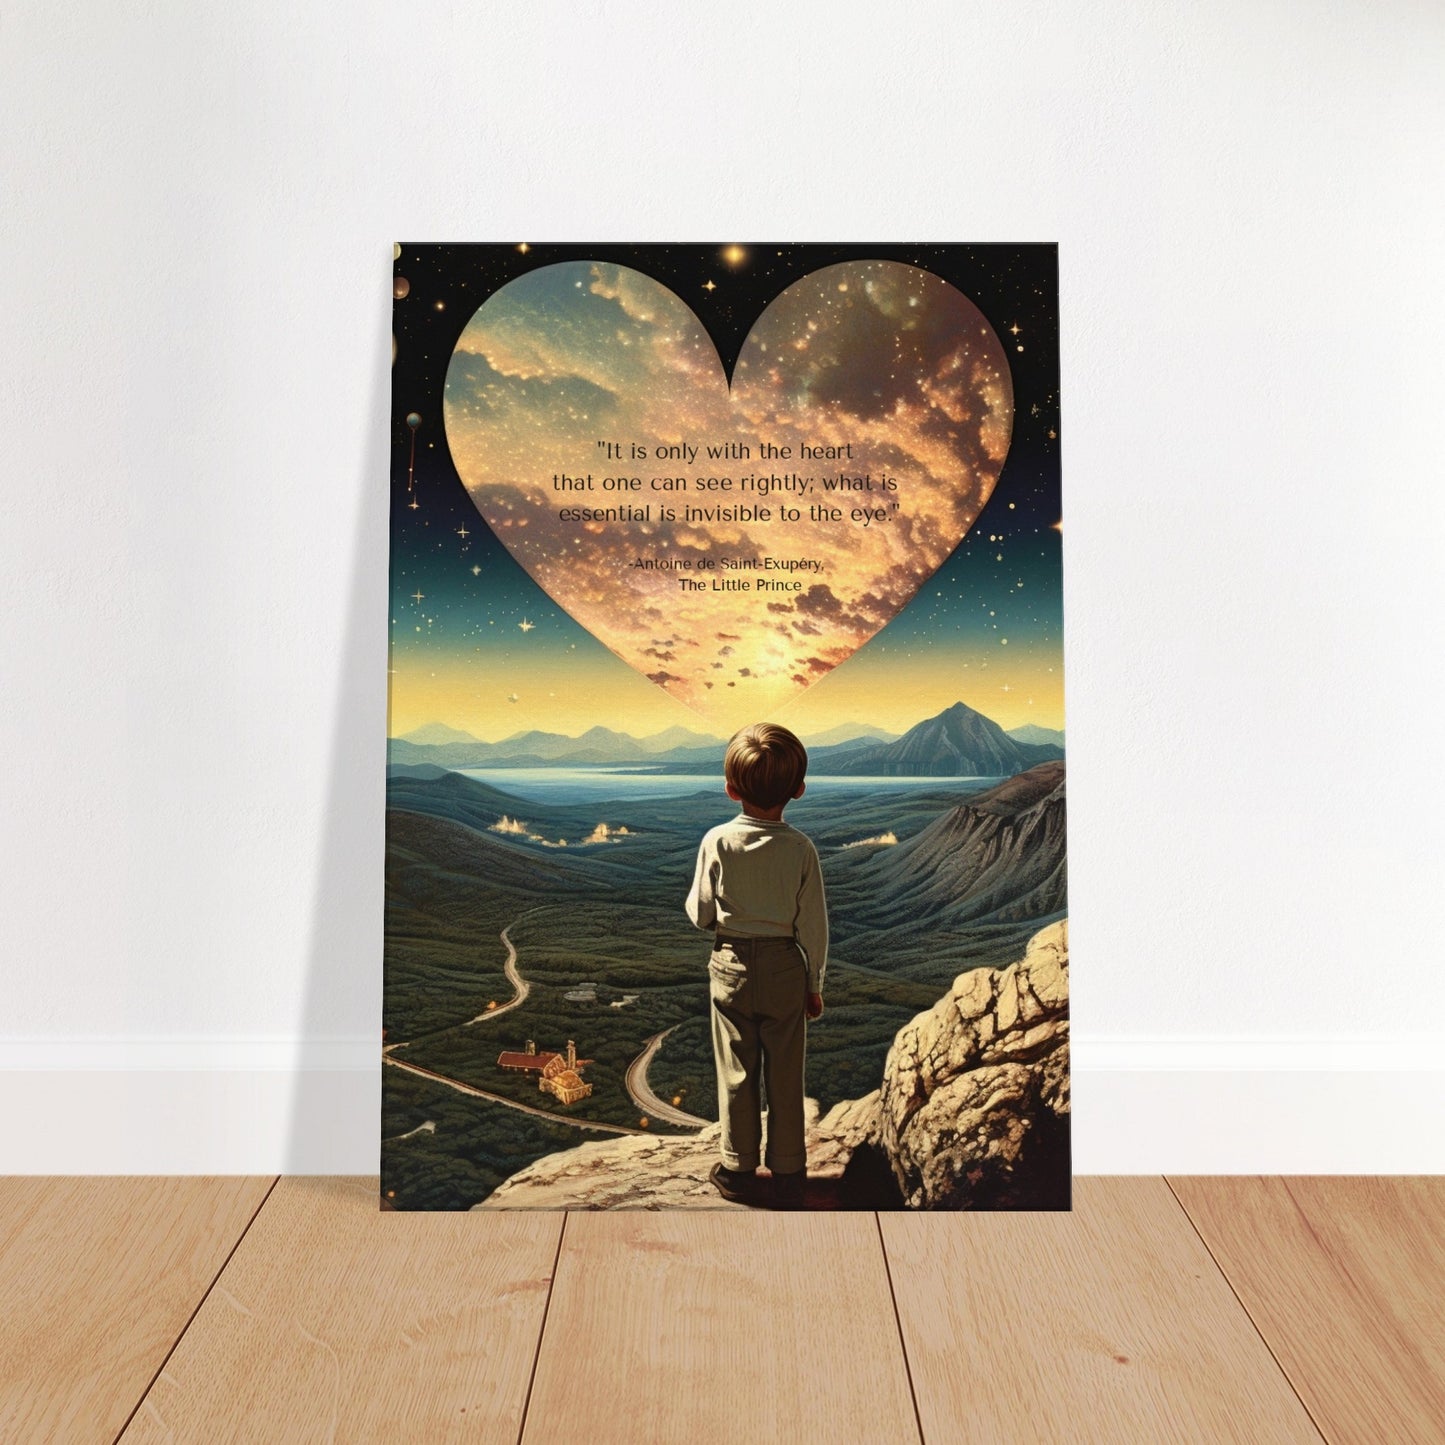 "Only with the heart", Little Prince Quote, Canvas Wall Art